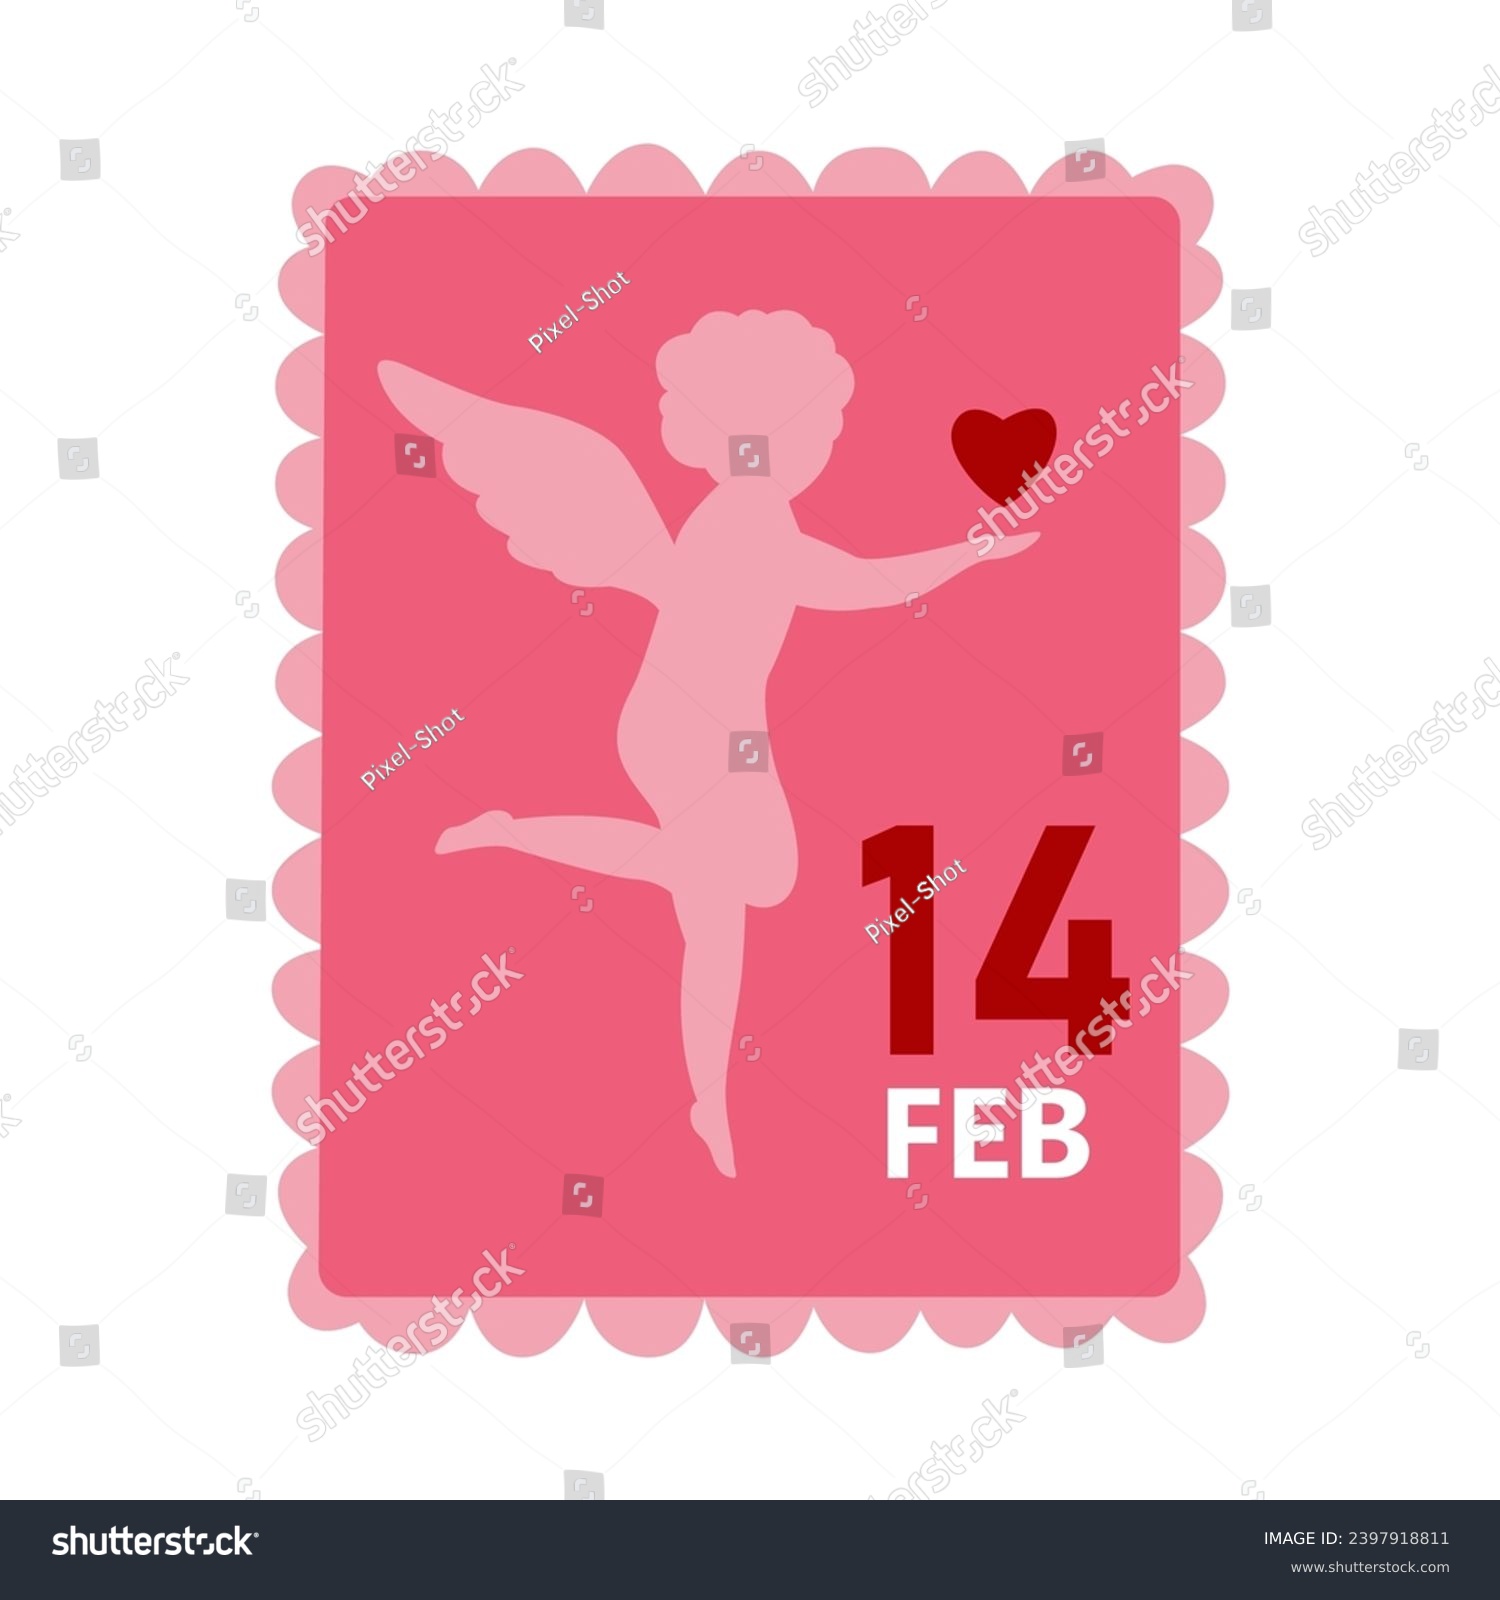 SVG of Postage stamp with Cupid on white background. Valentine's Day ce svg